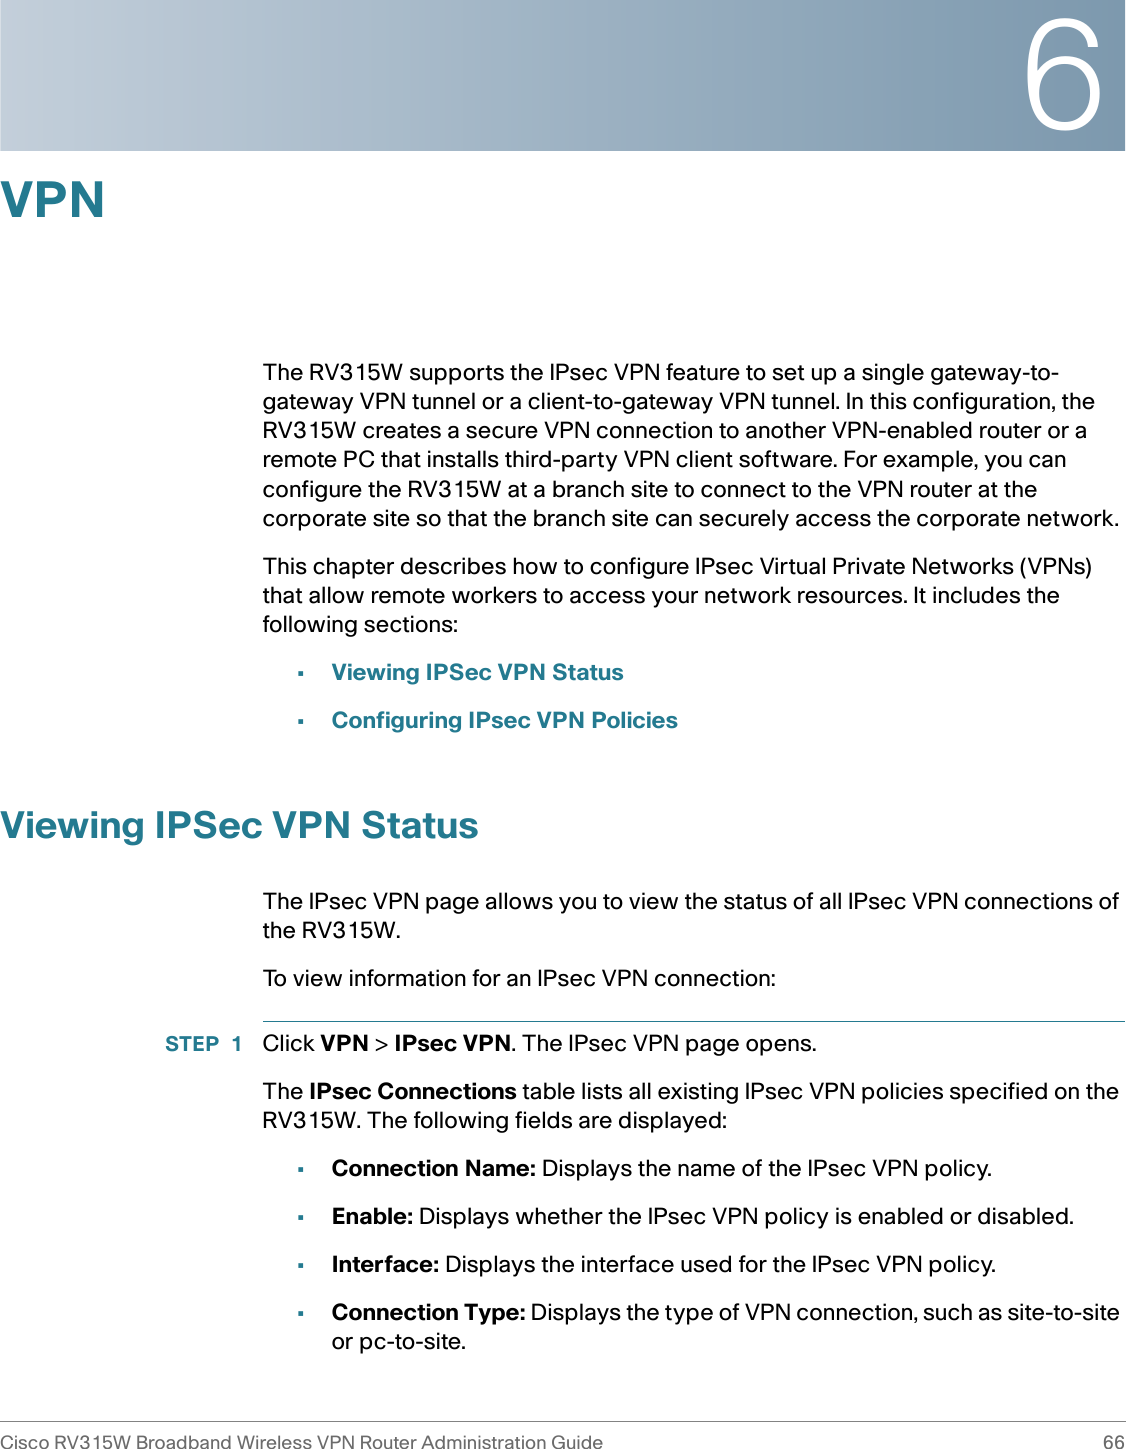 6Cisco RV315W Broadband Wireless VPN Router Administration Guide 66VPNThe RV315W supports the IPsec VPN feature to set up a single gateway-to-gateway VPN tunnel or a client-to-gateway VPN tunnel. In this configuration, the RV315W creates a secure VPN connection to another VPN-enabled router or a remote PC that installs third-party VPN client software. For example, you can configure the RV315W at a branch site to connect to the VPN router at the corporate site so that the branch site can securely access the corporate network. This chapter describes how to configure IPsec Virtual Private Networks (VPNs) that allow remote workers to access your network resources. It includes the following sections:•Viewing IPSec VPN Status•Configuring IPsec VPN PoliciesViewing IPSec VPN StatusThe IPsec VPN page allows you to view the status of all IPsec VPN connections of the RV315W. To view information for an IPsec VPN connection: STEP 1 Click VPN &gt; IPsec VPN. The IPsec VPN page opens. The IPsec Connections table lists all existing IPsec VPN policies specified on the RV315W. The following fields are displayed: •Connection Name: Displays the name of the IPsec VPN policy.•Enable: Displays whether the IPsec VPN policy is enabled or disabled.•Interface: Displays the interface used for the IPsec VPN policy. •Connection Type: Displays the type of VPN connection, such as site-to-site or pc-to-site. 